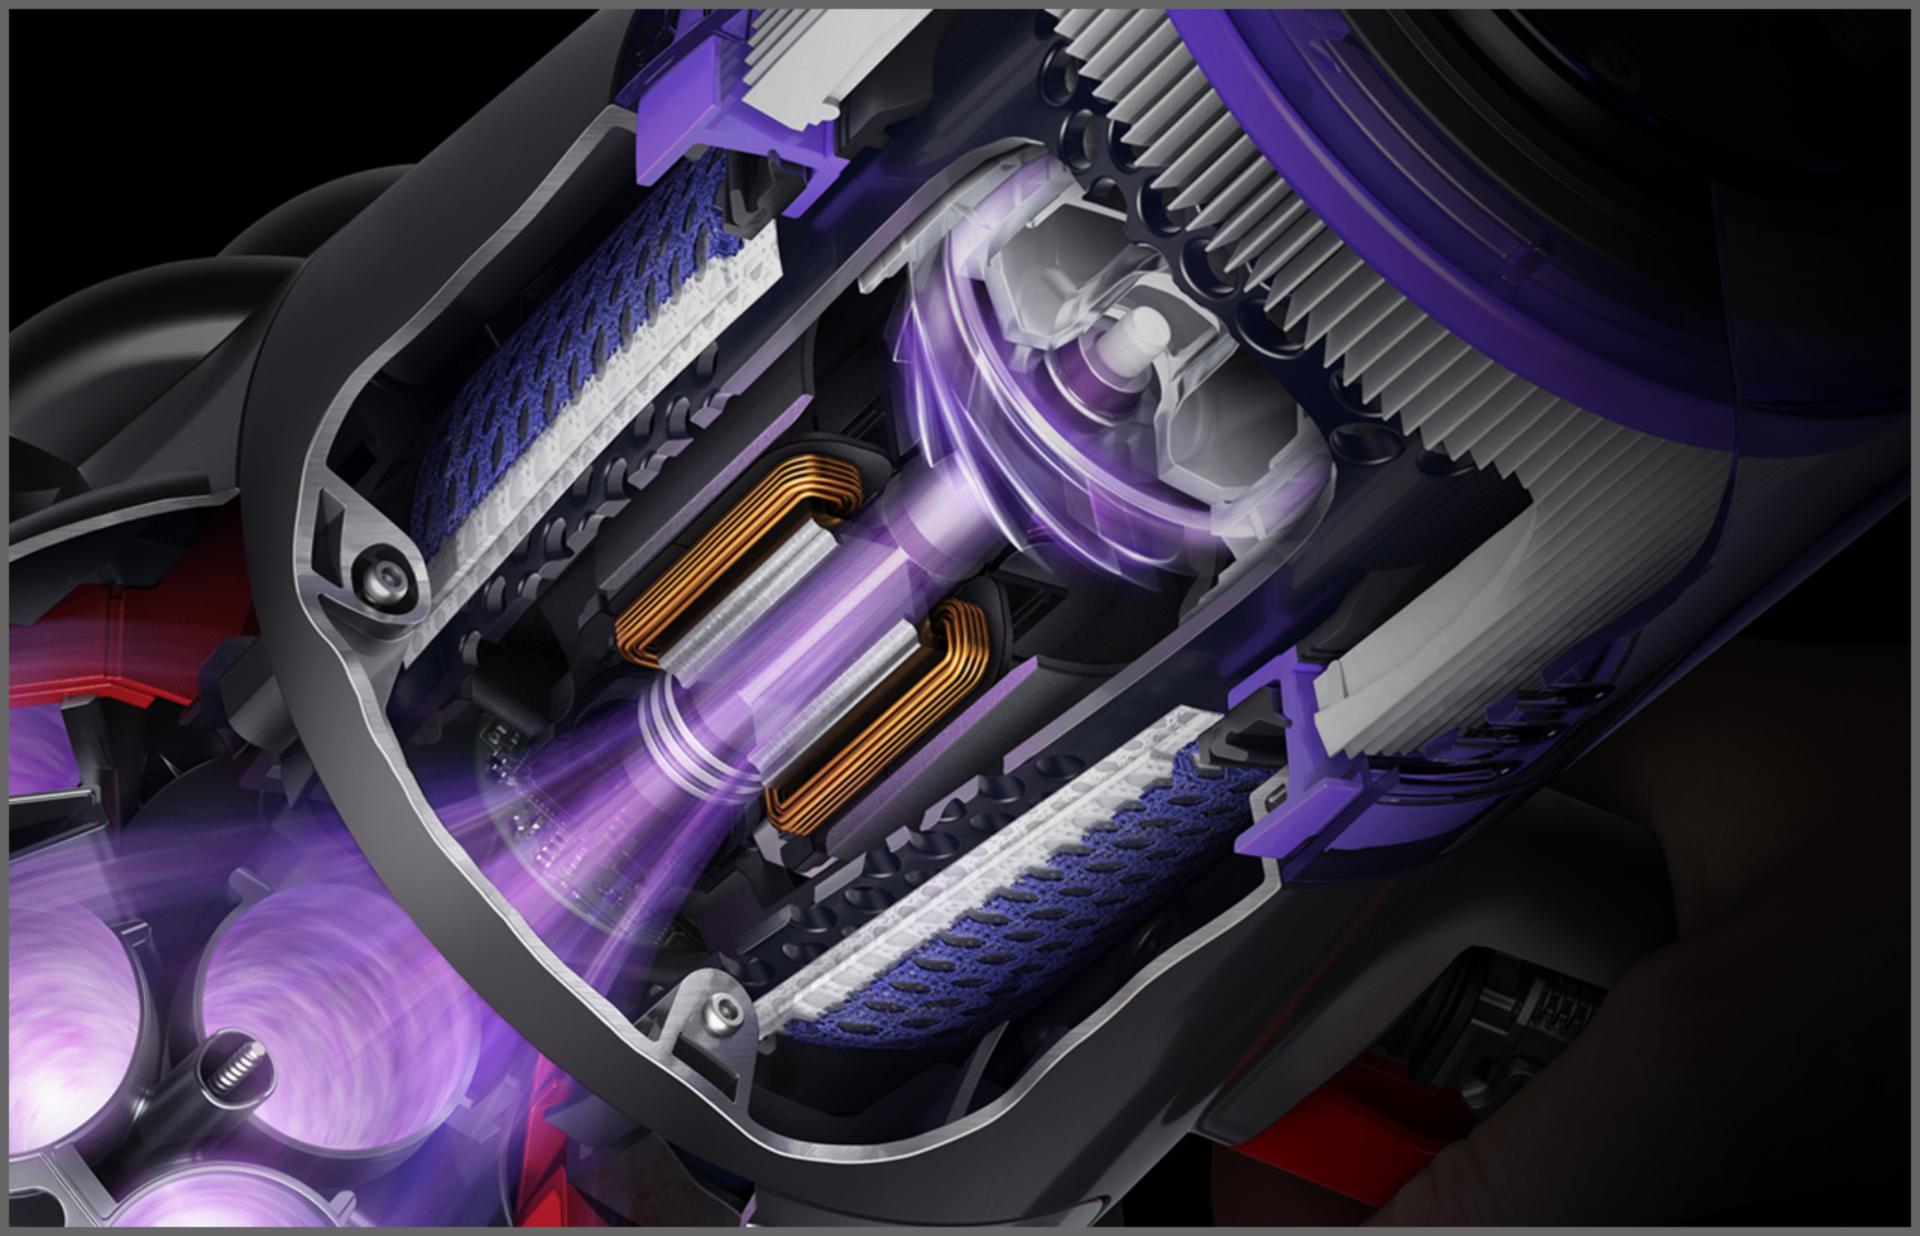 The technology behind the Dyson V11 vacuum